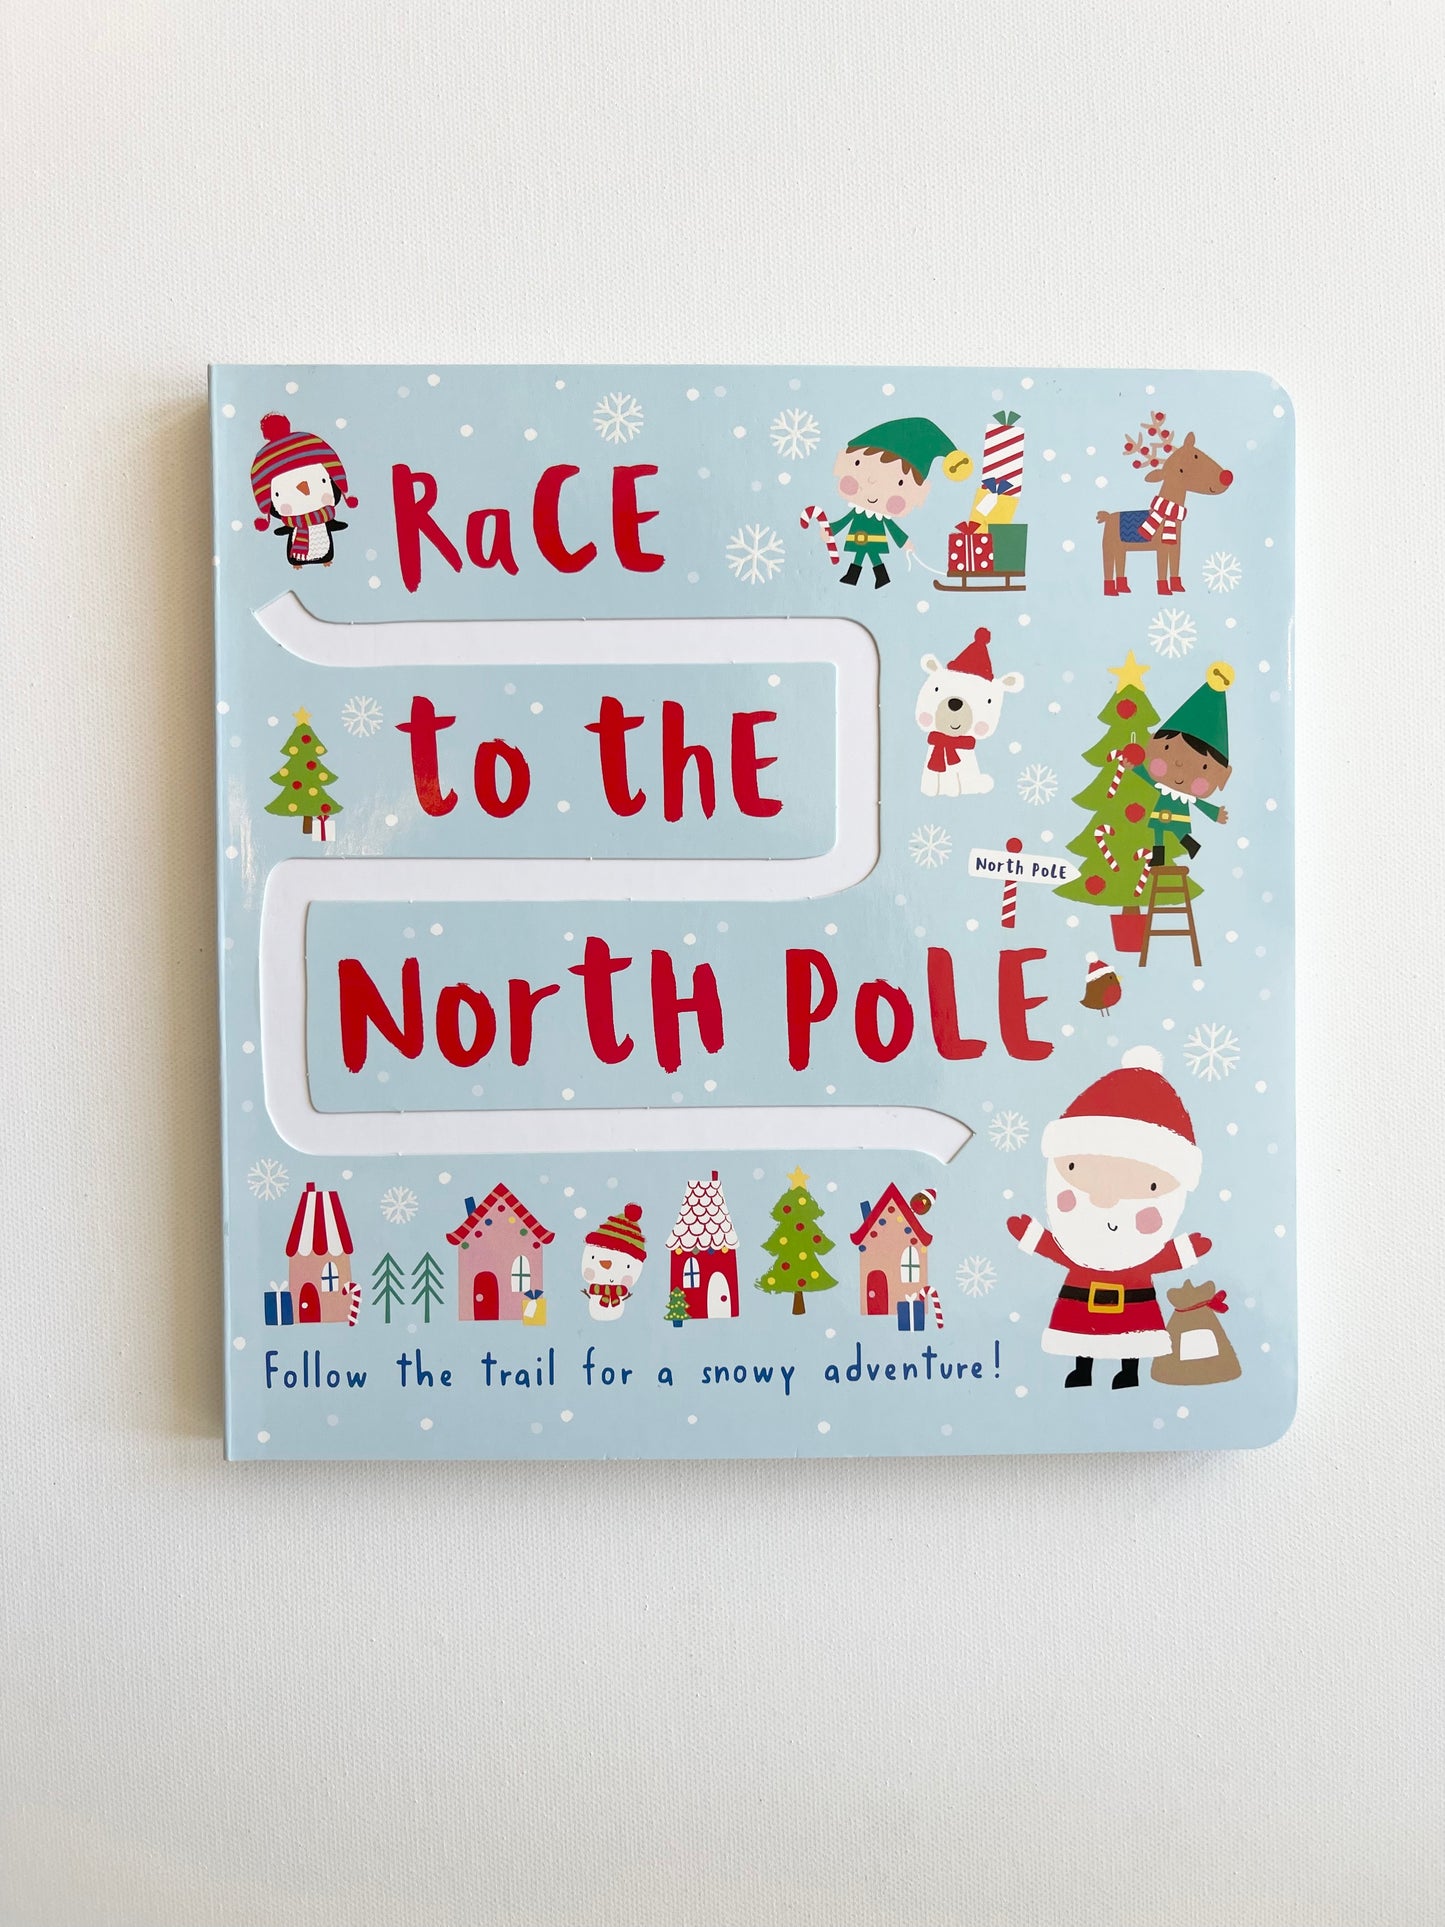 race to the north pole